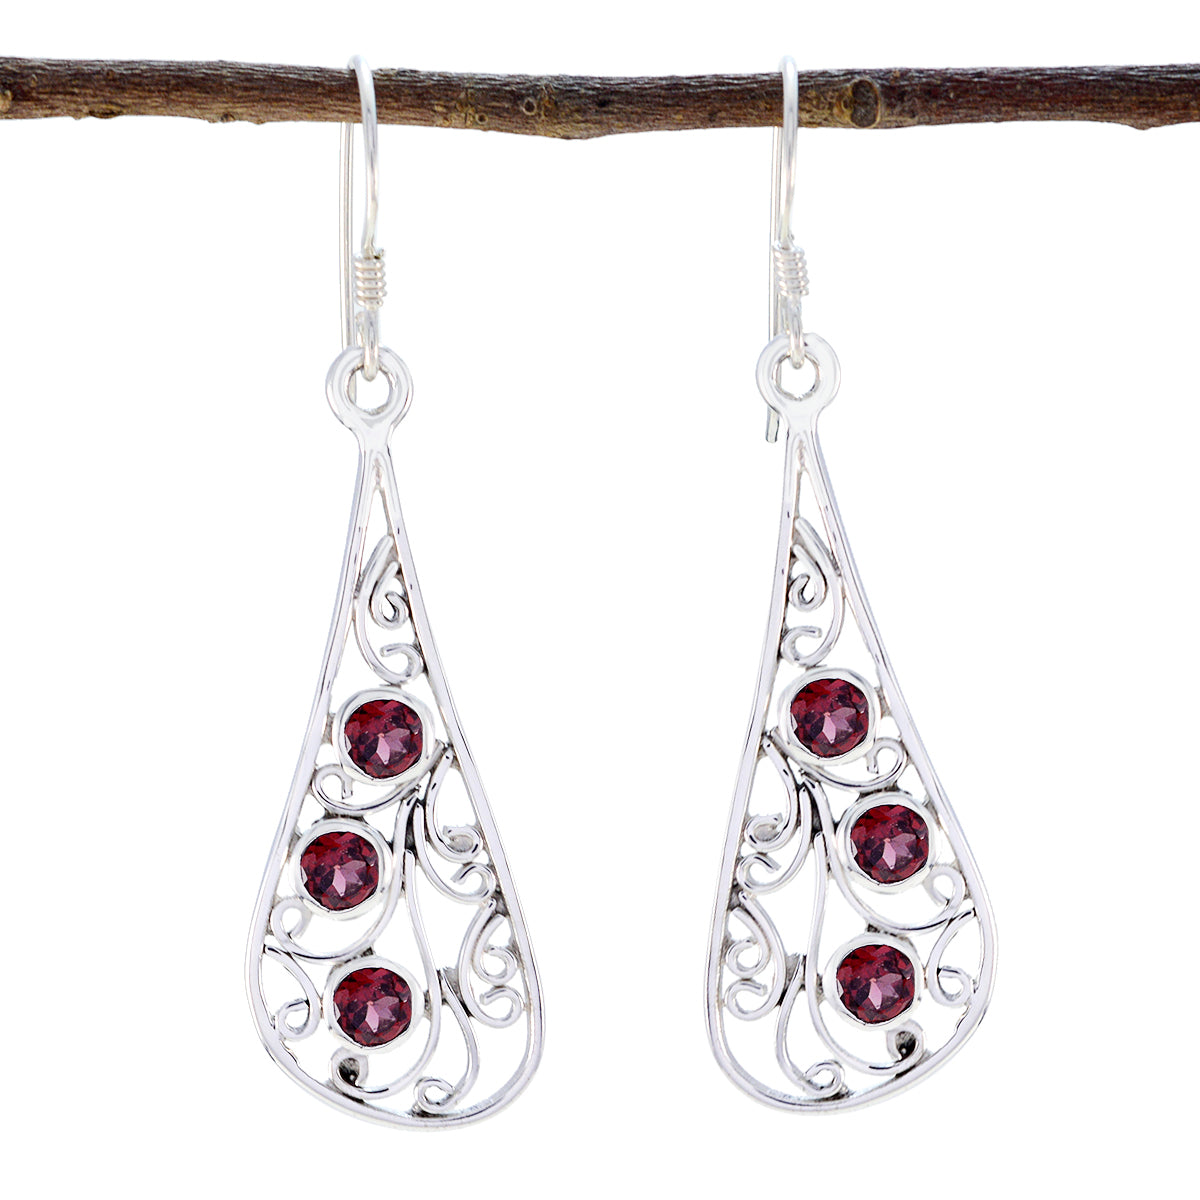 Riyo Good Gemstones round Faceted Red Garnet Silver Earring gift for wife